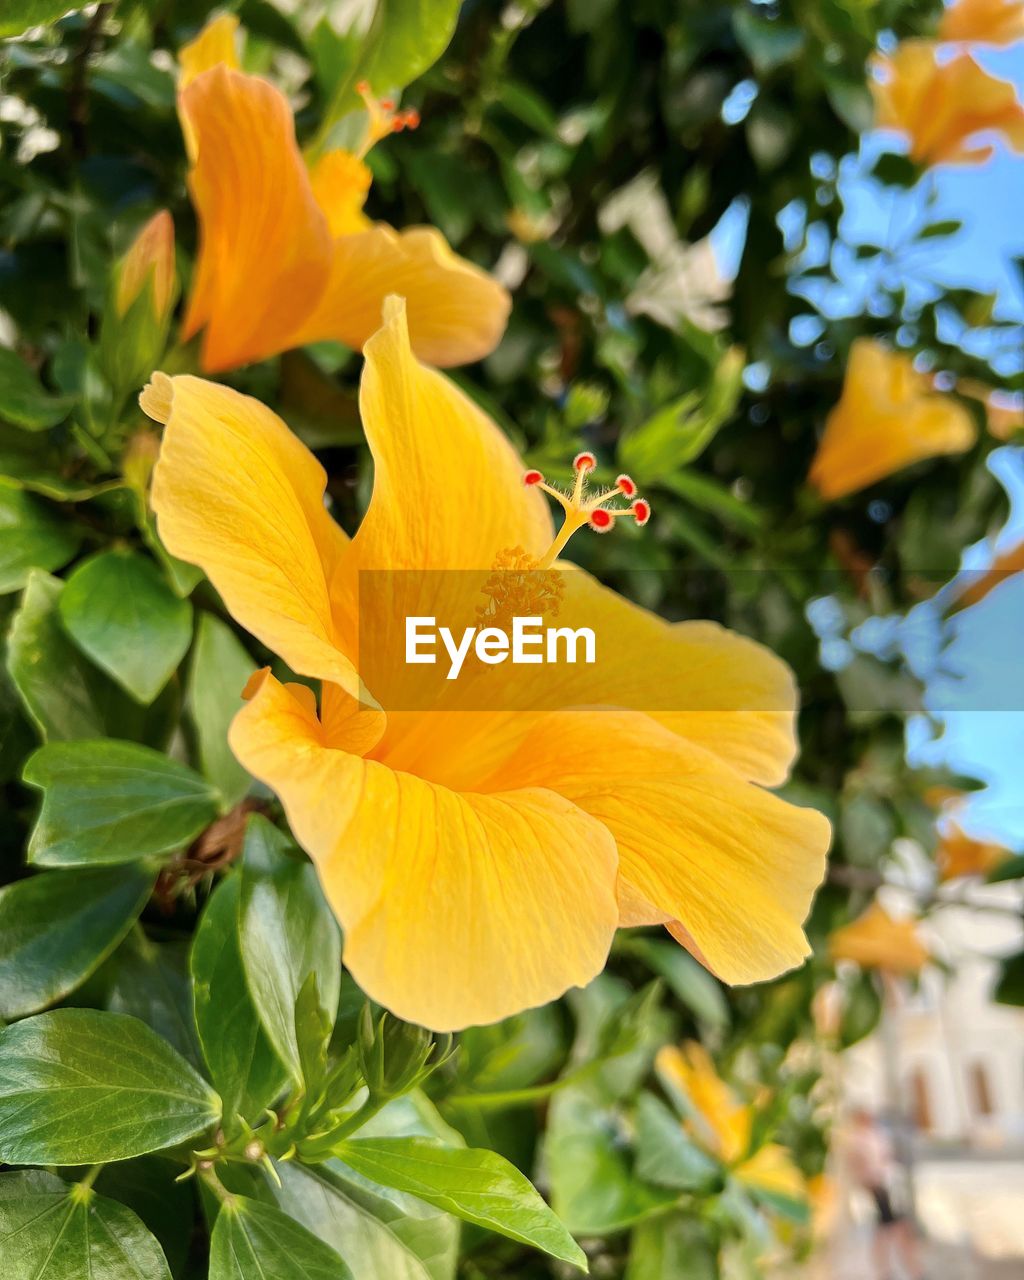 flowering plant, flower, plant, yellow, beauty in nature, freshness, petal, flower head, fragility, growth, close-up, nature, inflorescence, plant part, leaf, no people, focus on foreground, outdoors, hibiscus, botany, springtime, orange color, day, pollen, blossom, animal wildlife